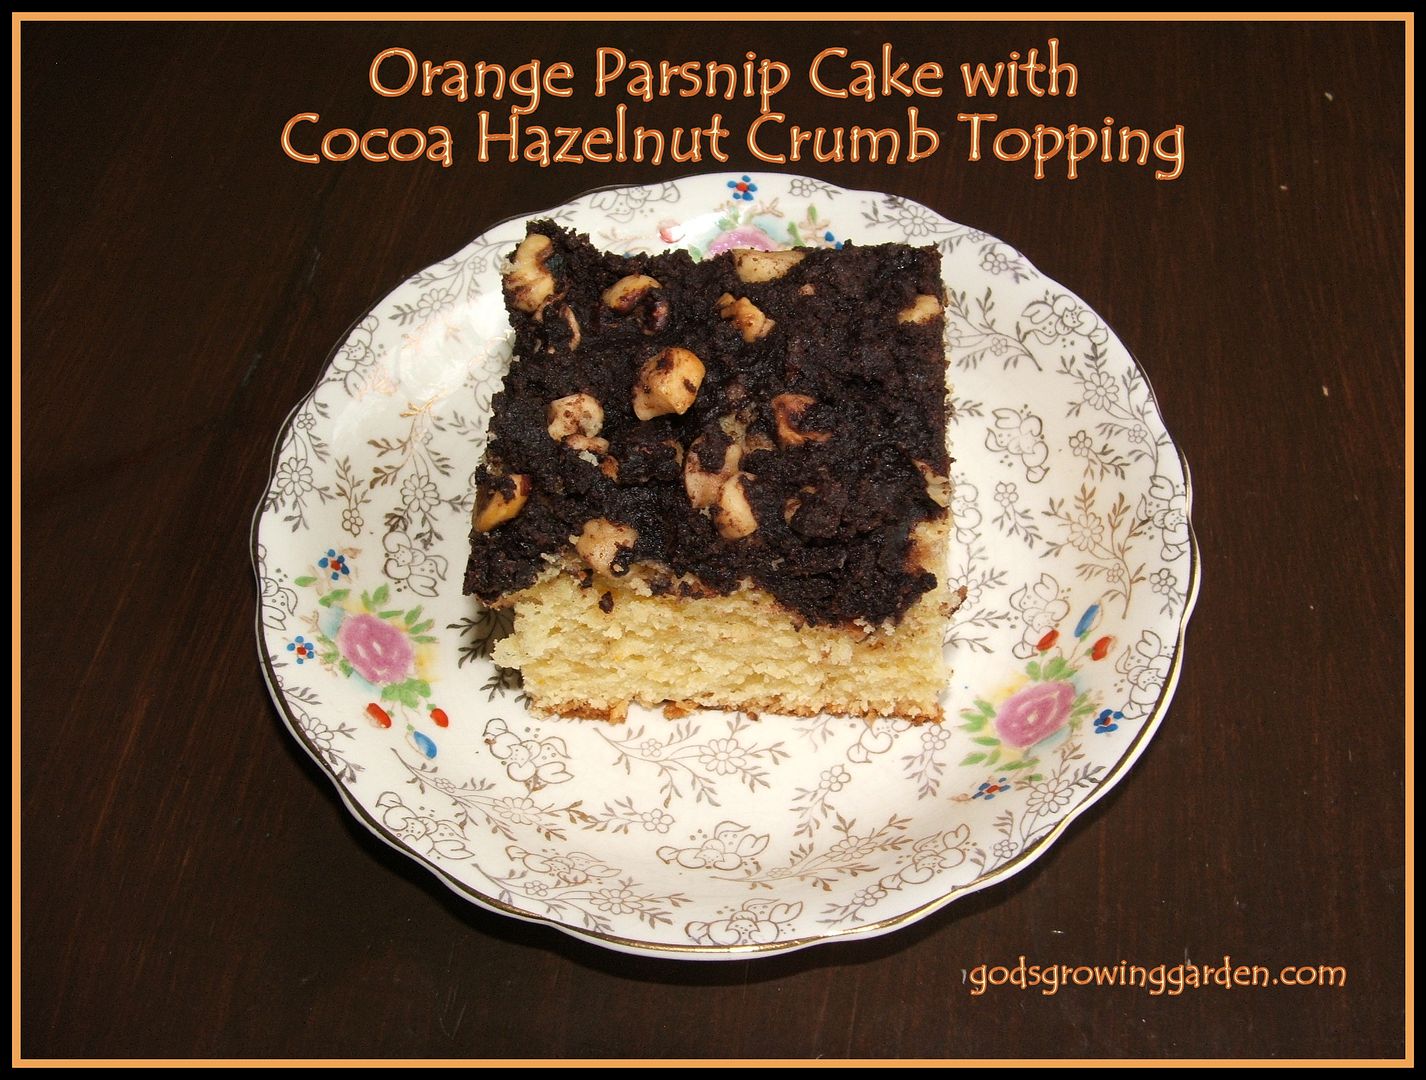 Orange Parsnip Cake by Angie Ouellette-Tower for godsgrowinggarden.com photo 011_zps6be5d91e.jpg